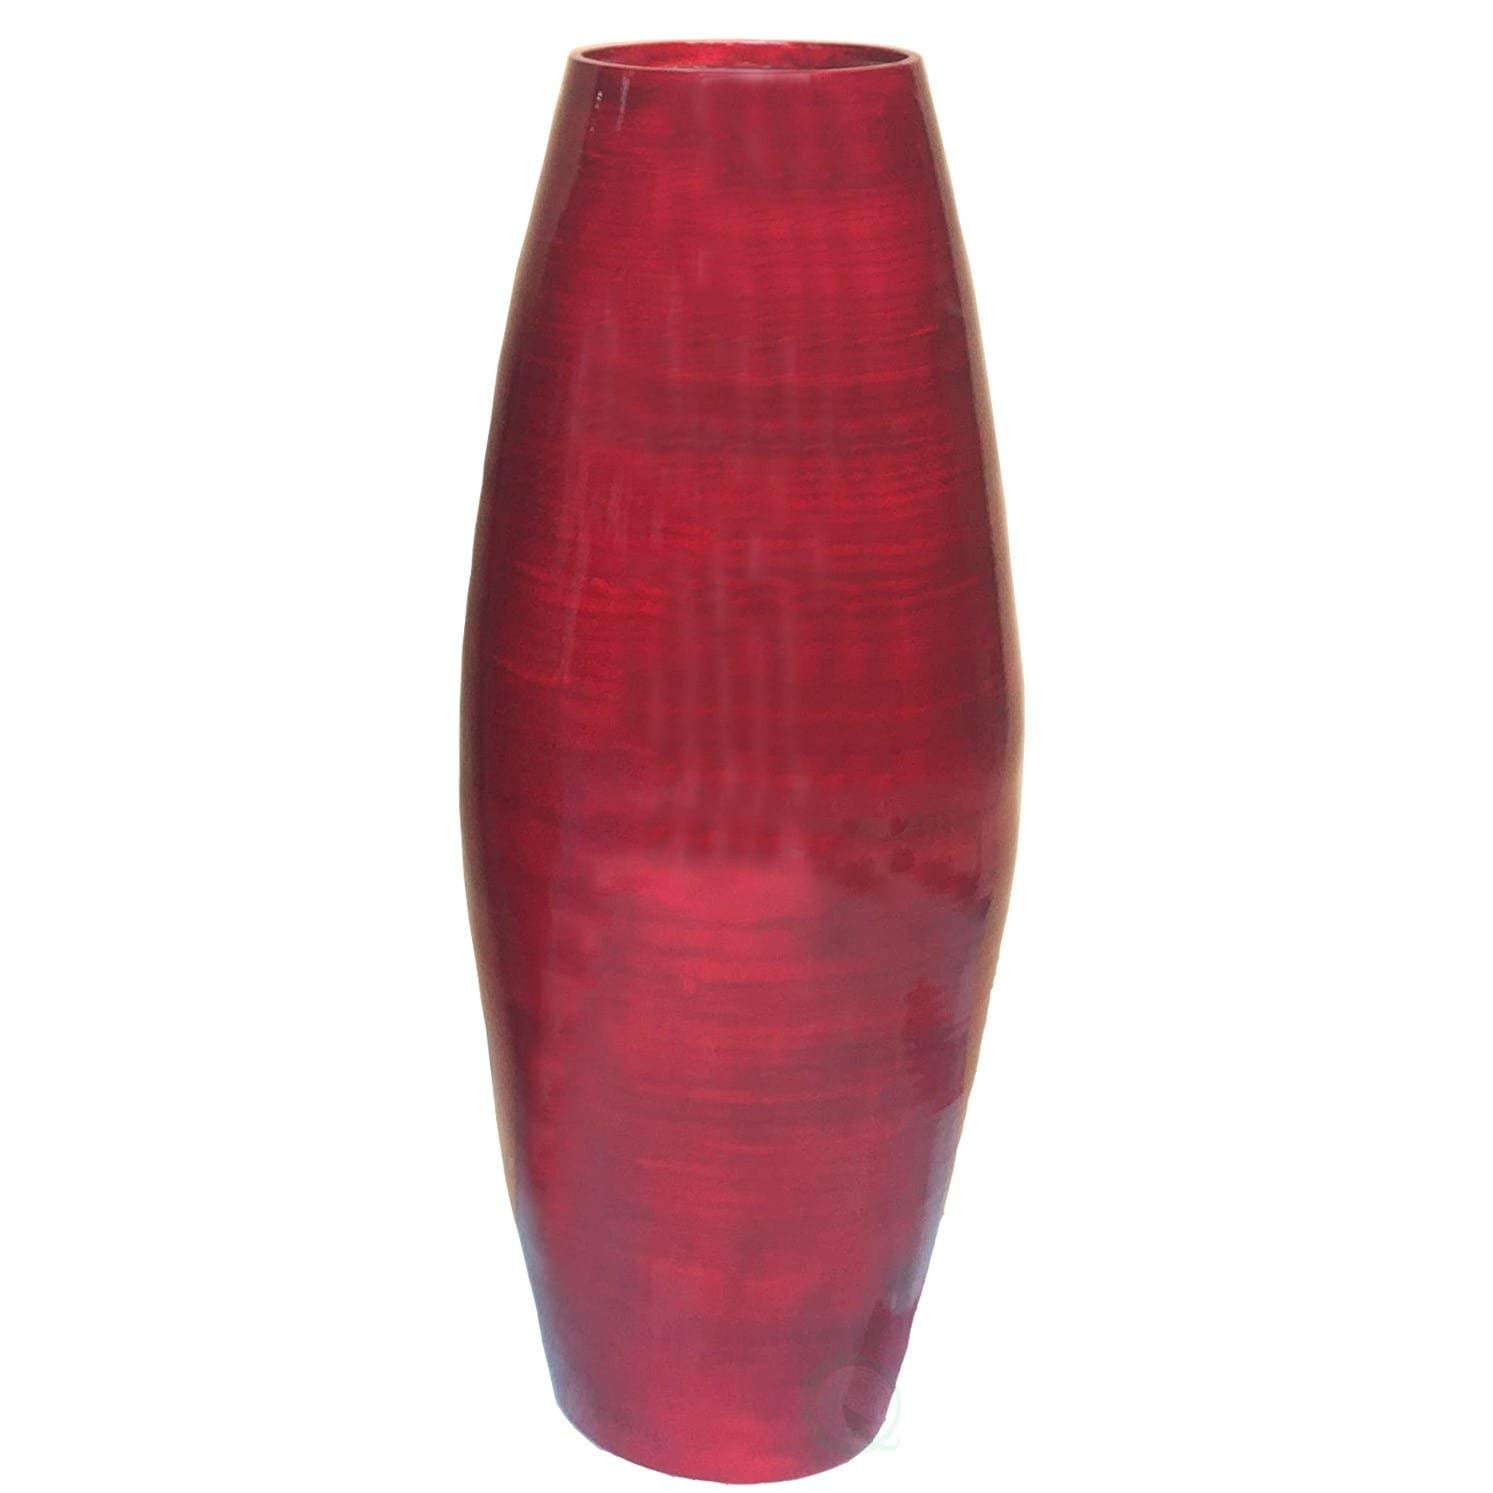 large plastic floor vases of amazon com uniquewise 27 5 tall bamboo floor vase red home intended for amazon com uniquewise 27 5 tall bamboo floor vase red home kitchen